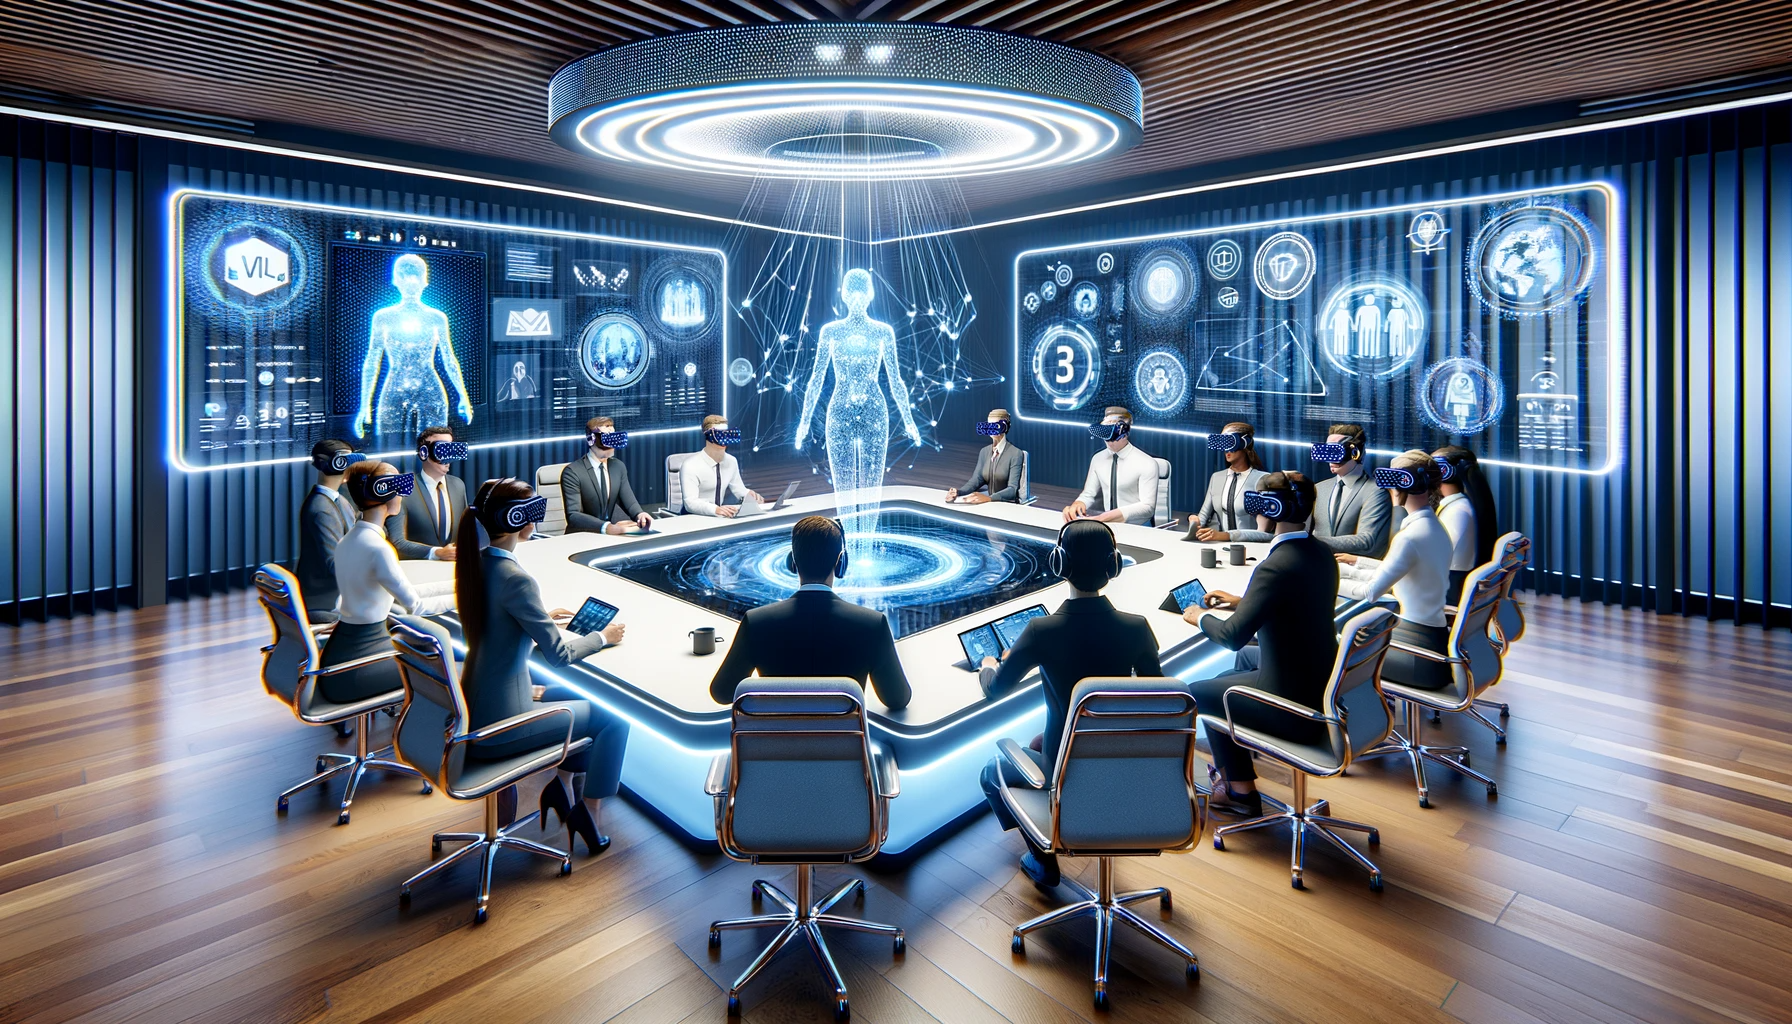 High-tech virtual meeting room with diverse avatars around a holographic table, featuring Microsoft Mesh interface and Microsoft Teams logos, symbolizing hybrid work.